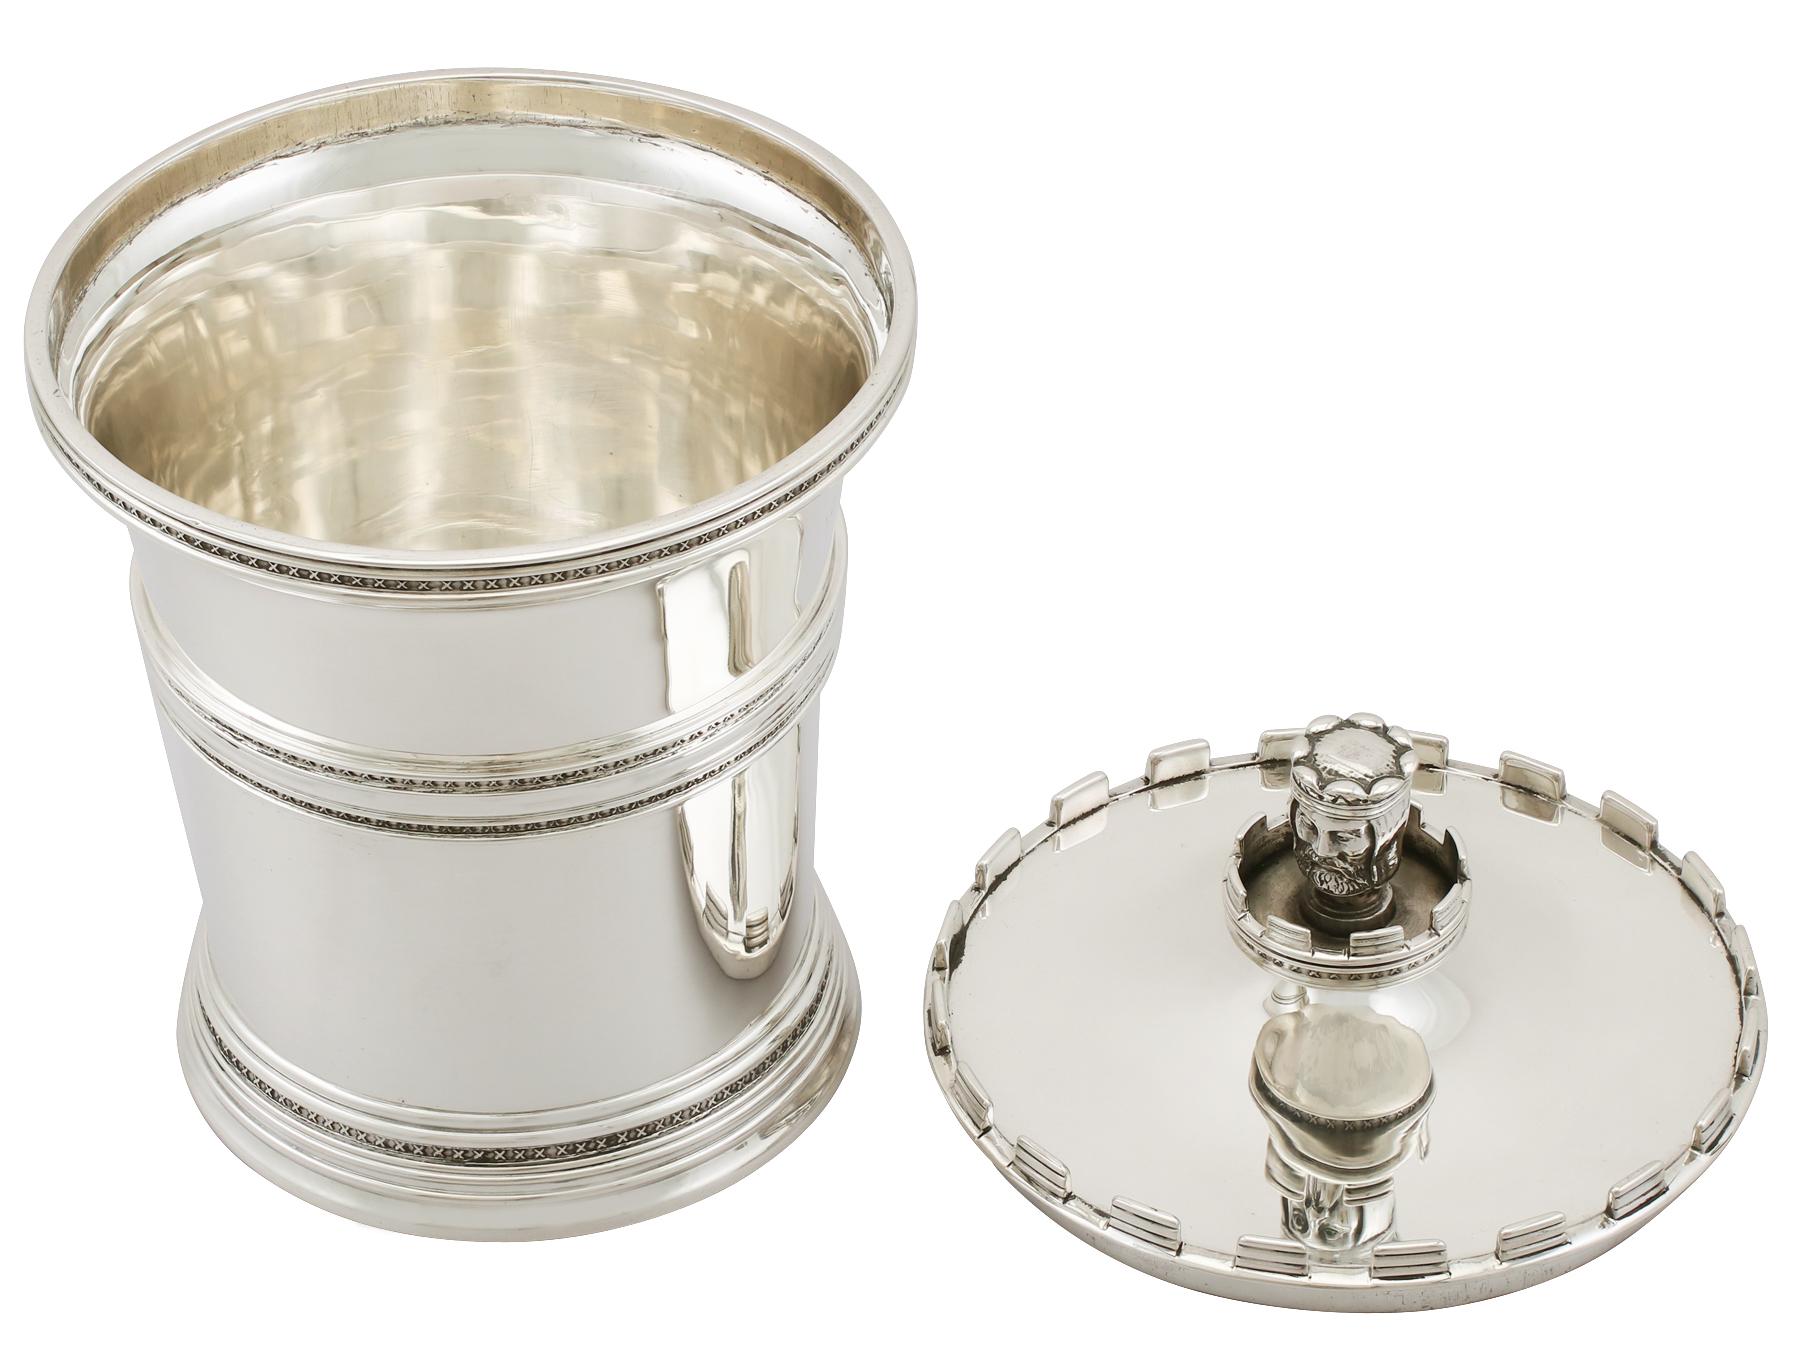 Early 20th Century 1912 Antique Sterling Silver Tea Caddy